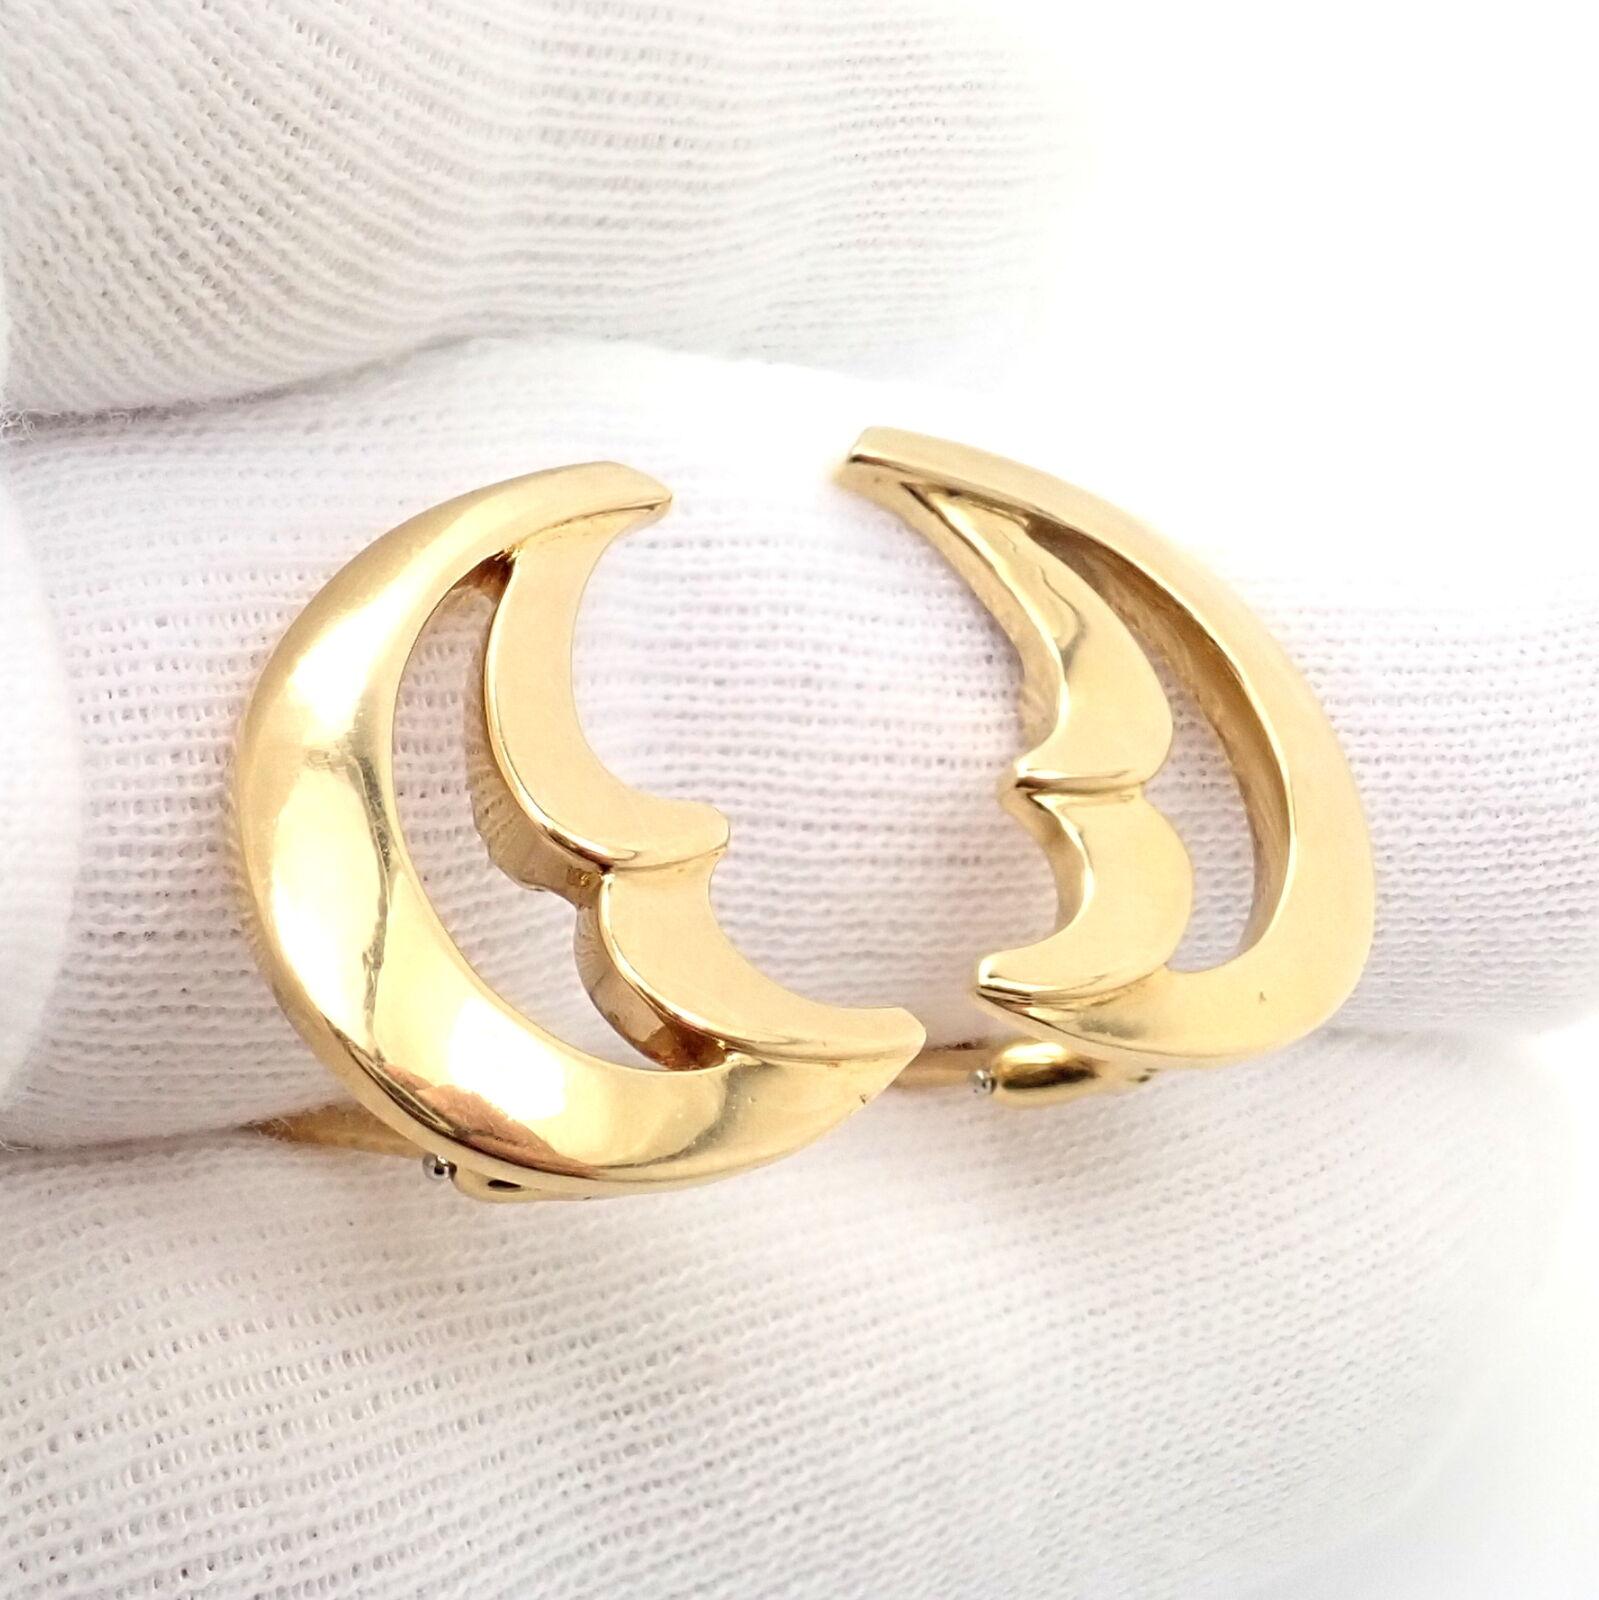 Tiffany & Co. Paloma Picasso Vintage Crescent Moon Large Yellow Gold Earrings In Excellent Condition For Sale In Holland, PA